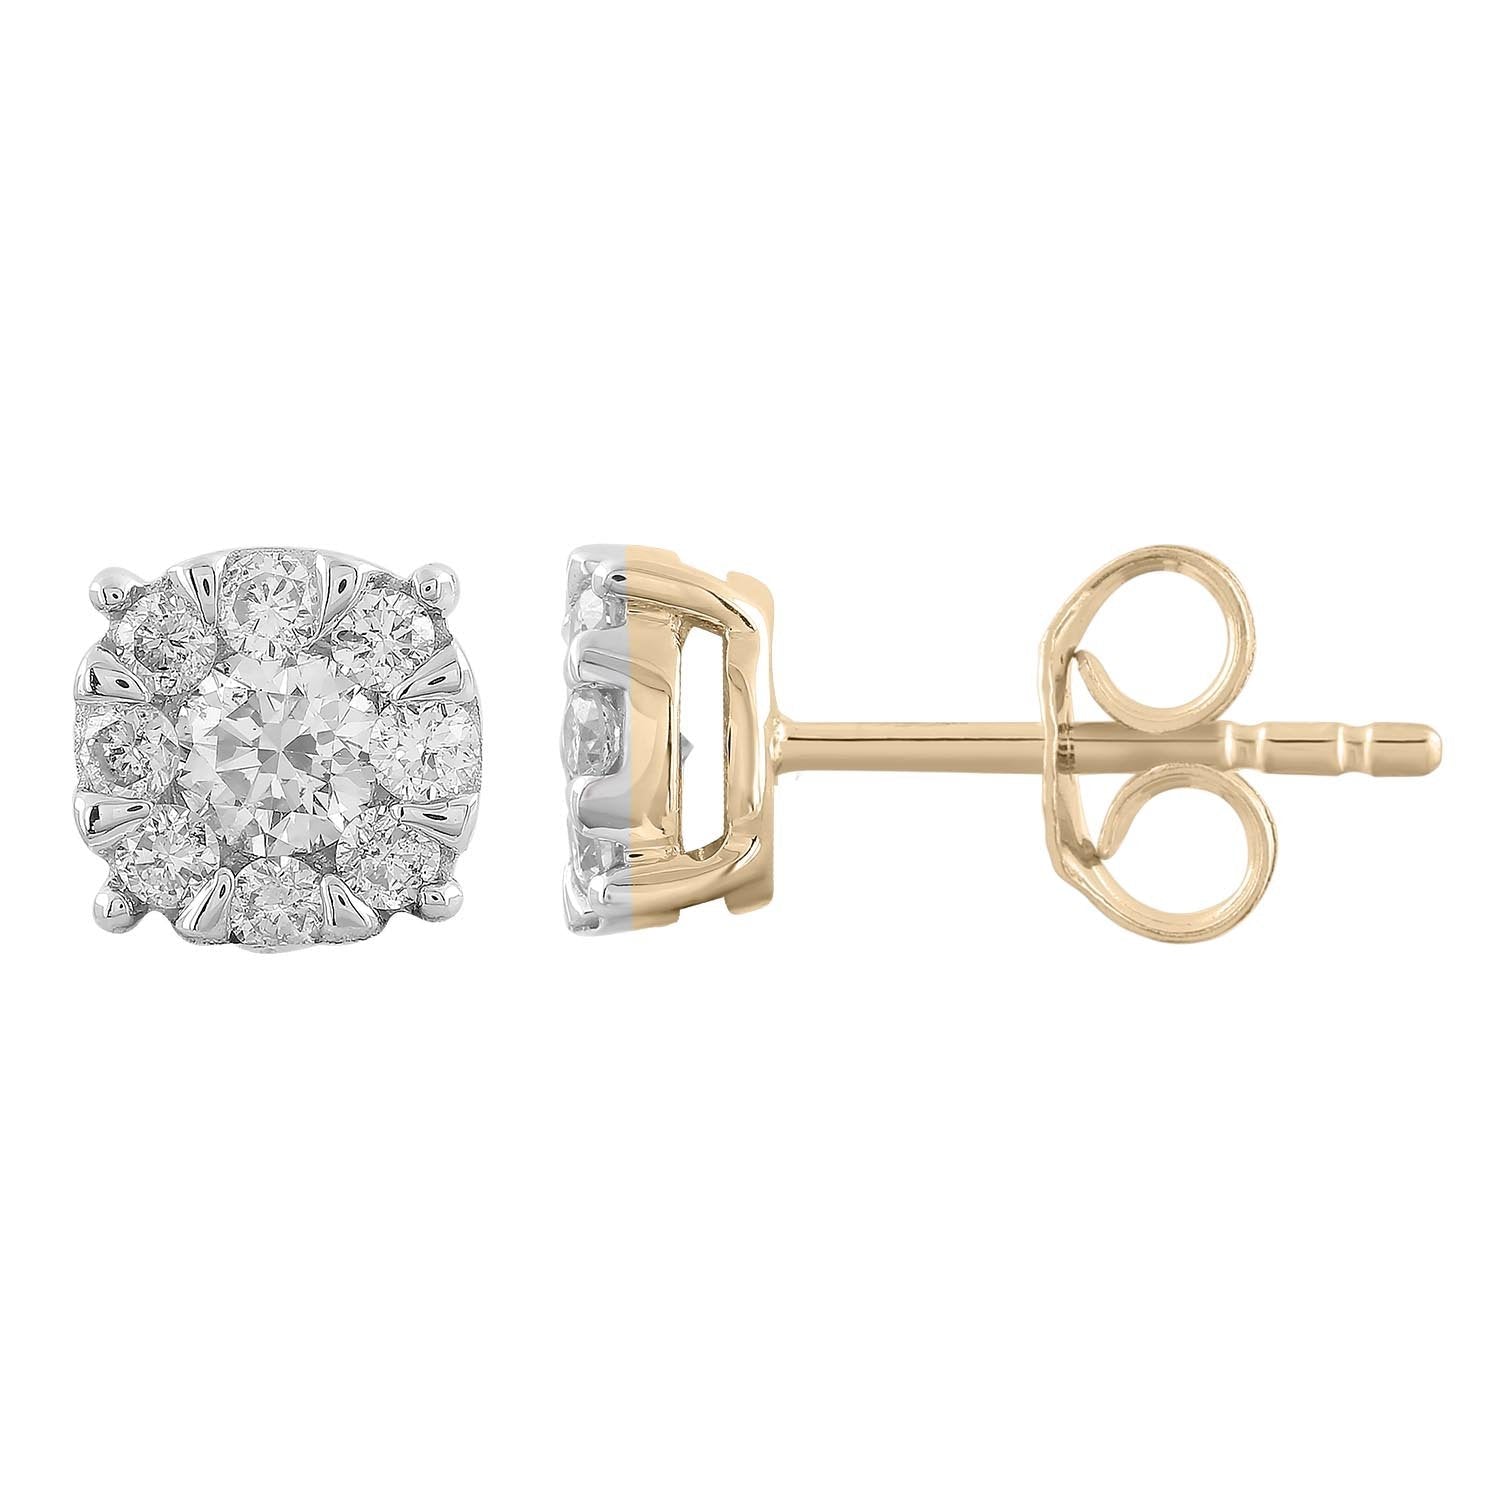 Stud Earrings with 0.5ct Diamonds in 9K Yellow Gold